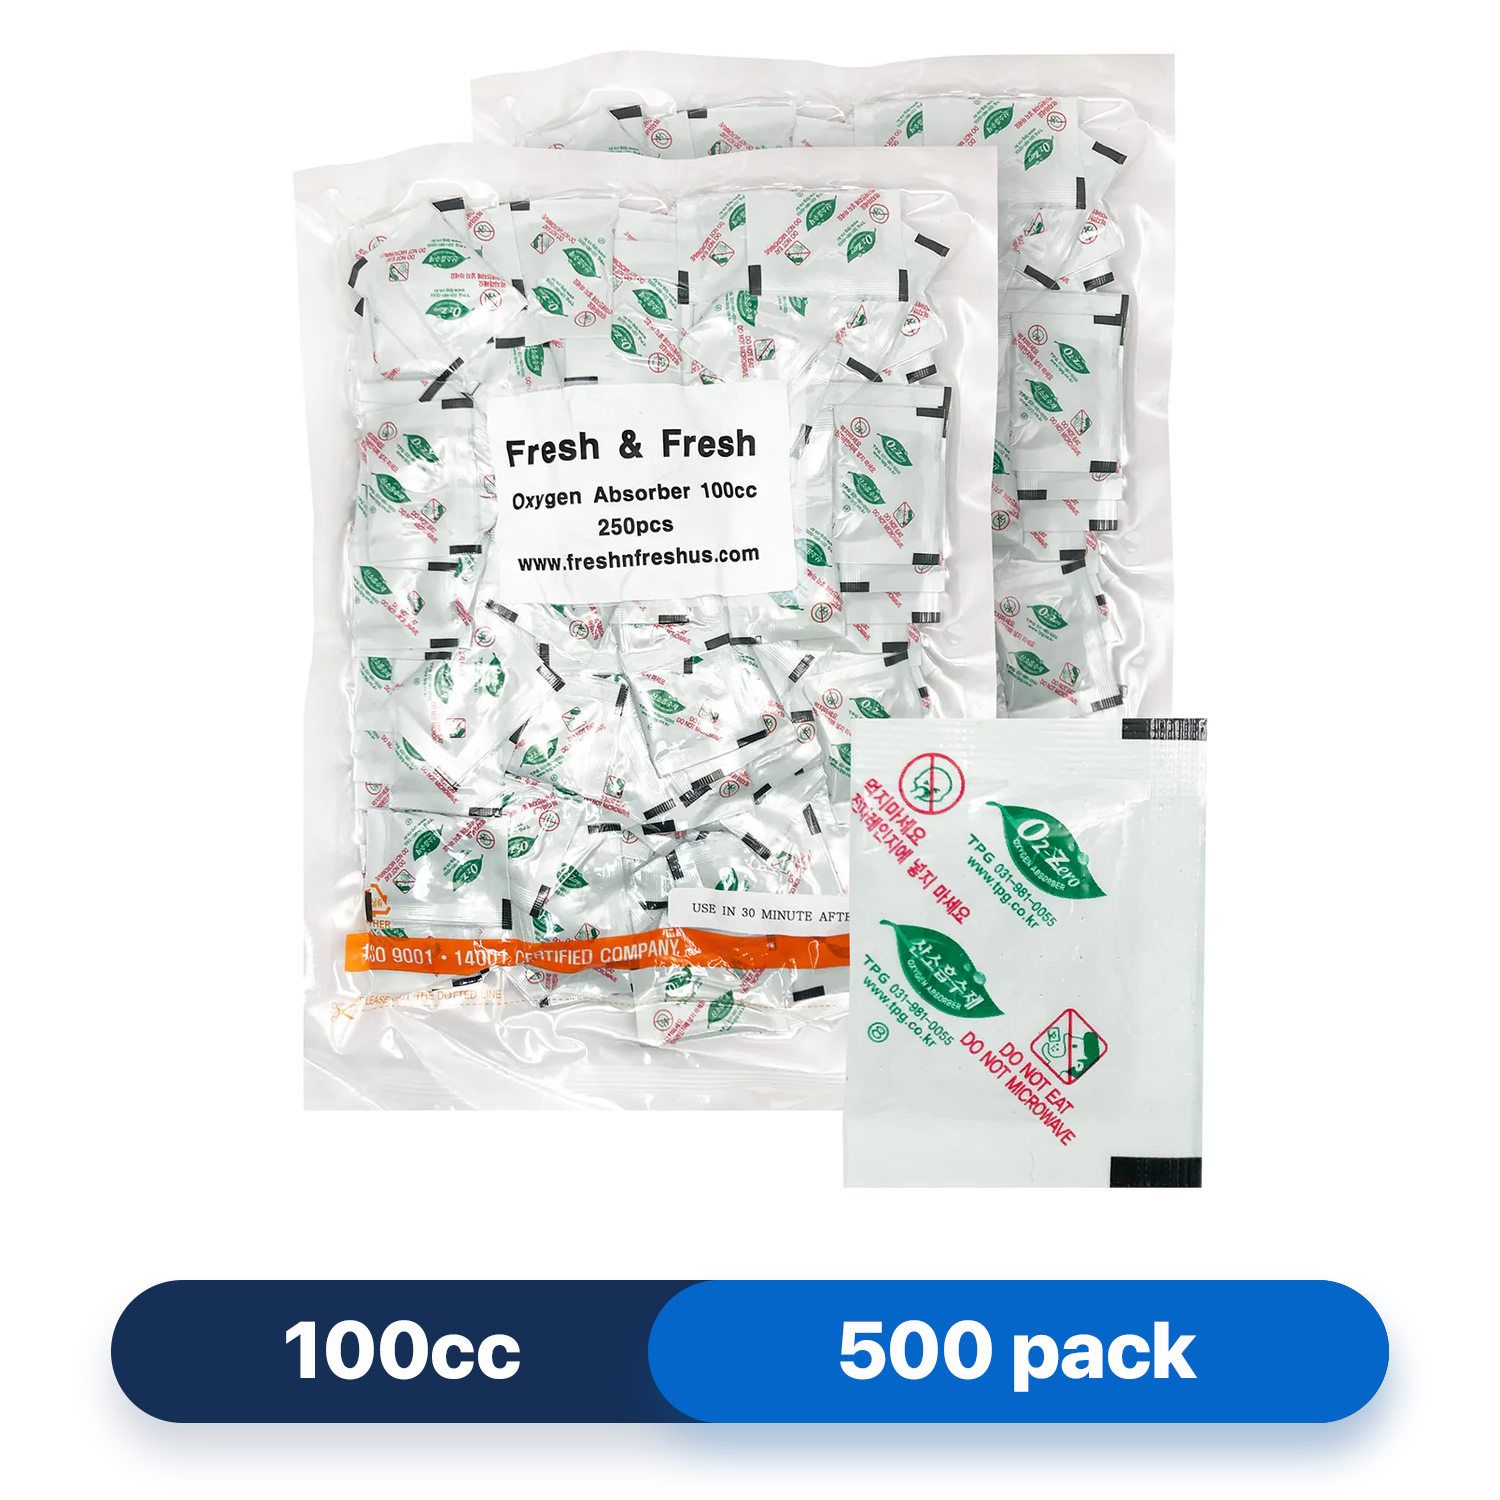 Fresh & Fresh (500 Packs) 100 CC Premium Oxygen Absorbers(2 Bag of 250 Packets) - ISO 9001 Certified Facility Manufactured